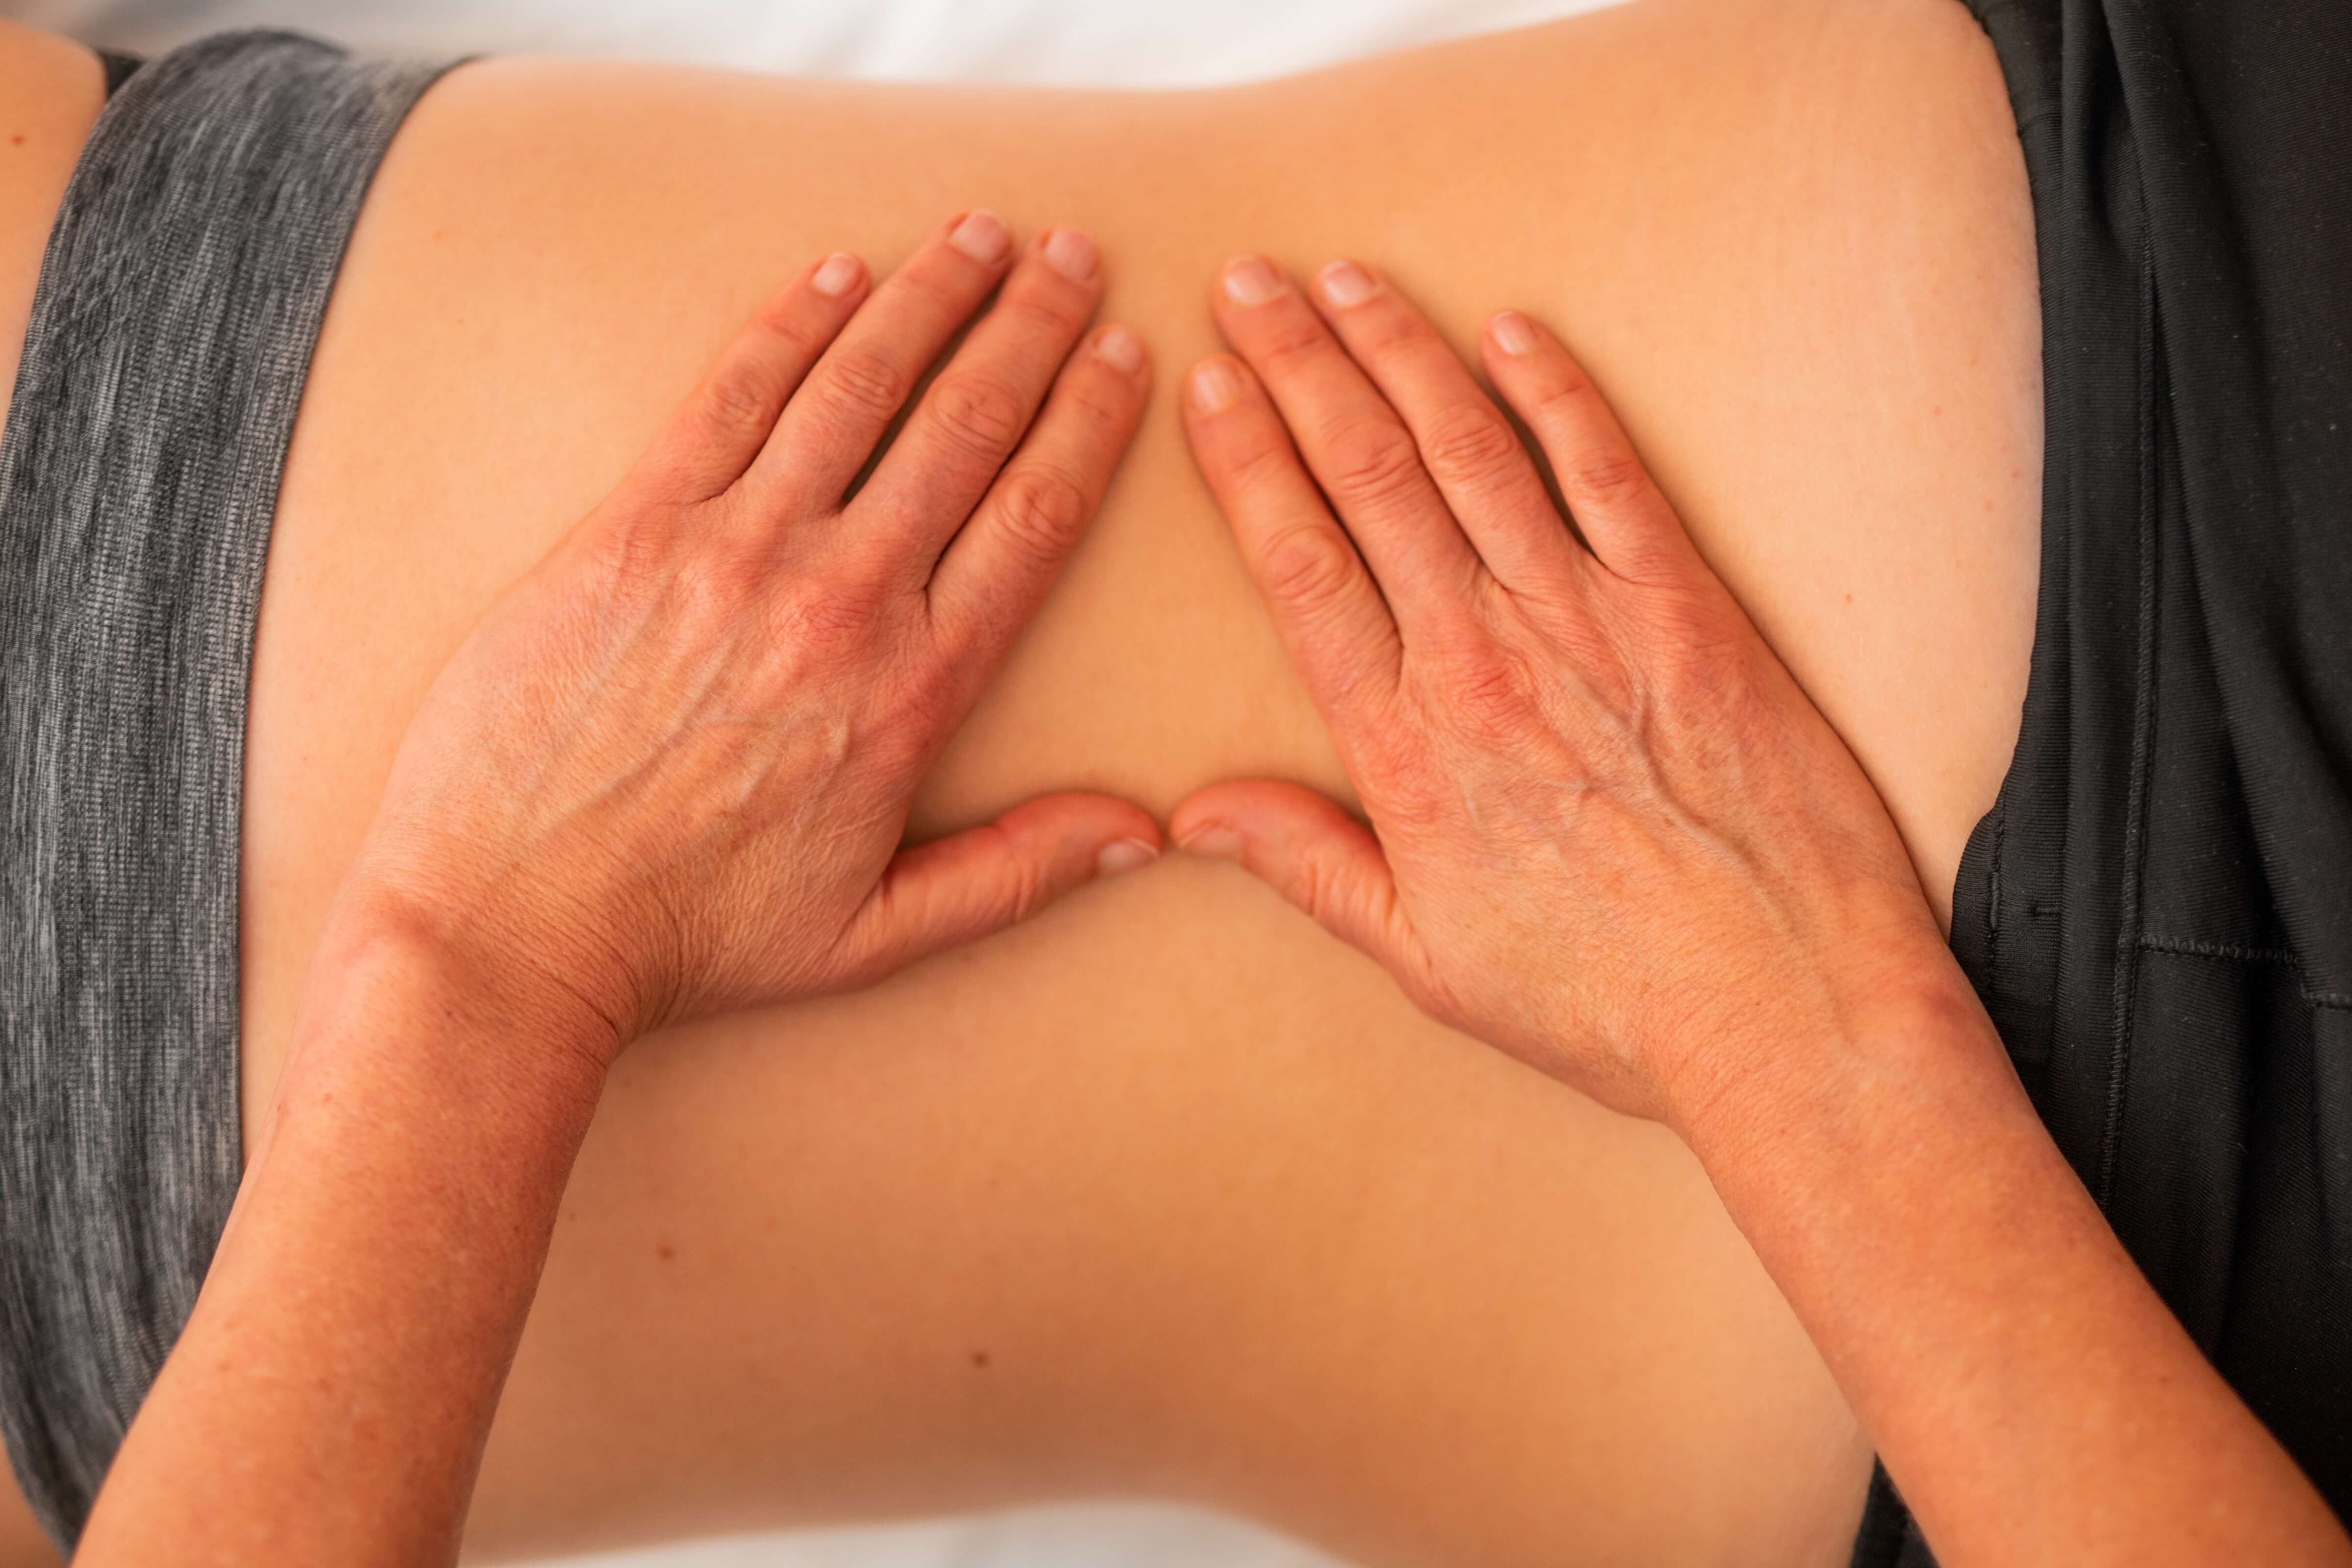 Consult Physio - At Consult Physio Ltd, we offer high-quality physiotherapy treatment for patients in Peterborough and across Cambridgeshire and Northamptonshire. Our skilled and experienced team are here to help with a wide range of issues, so contact us today to find out more and book an appointment.